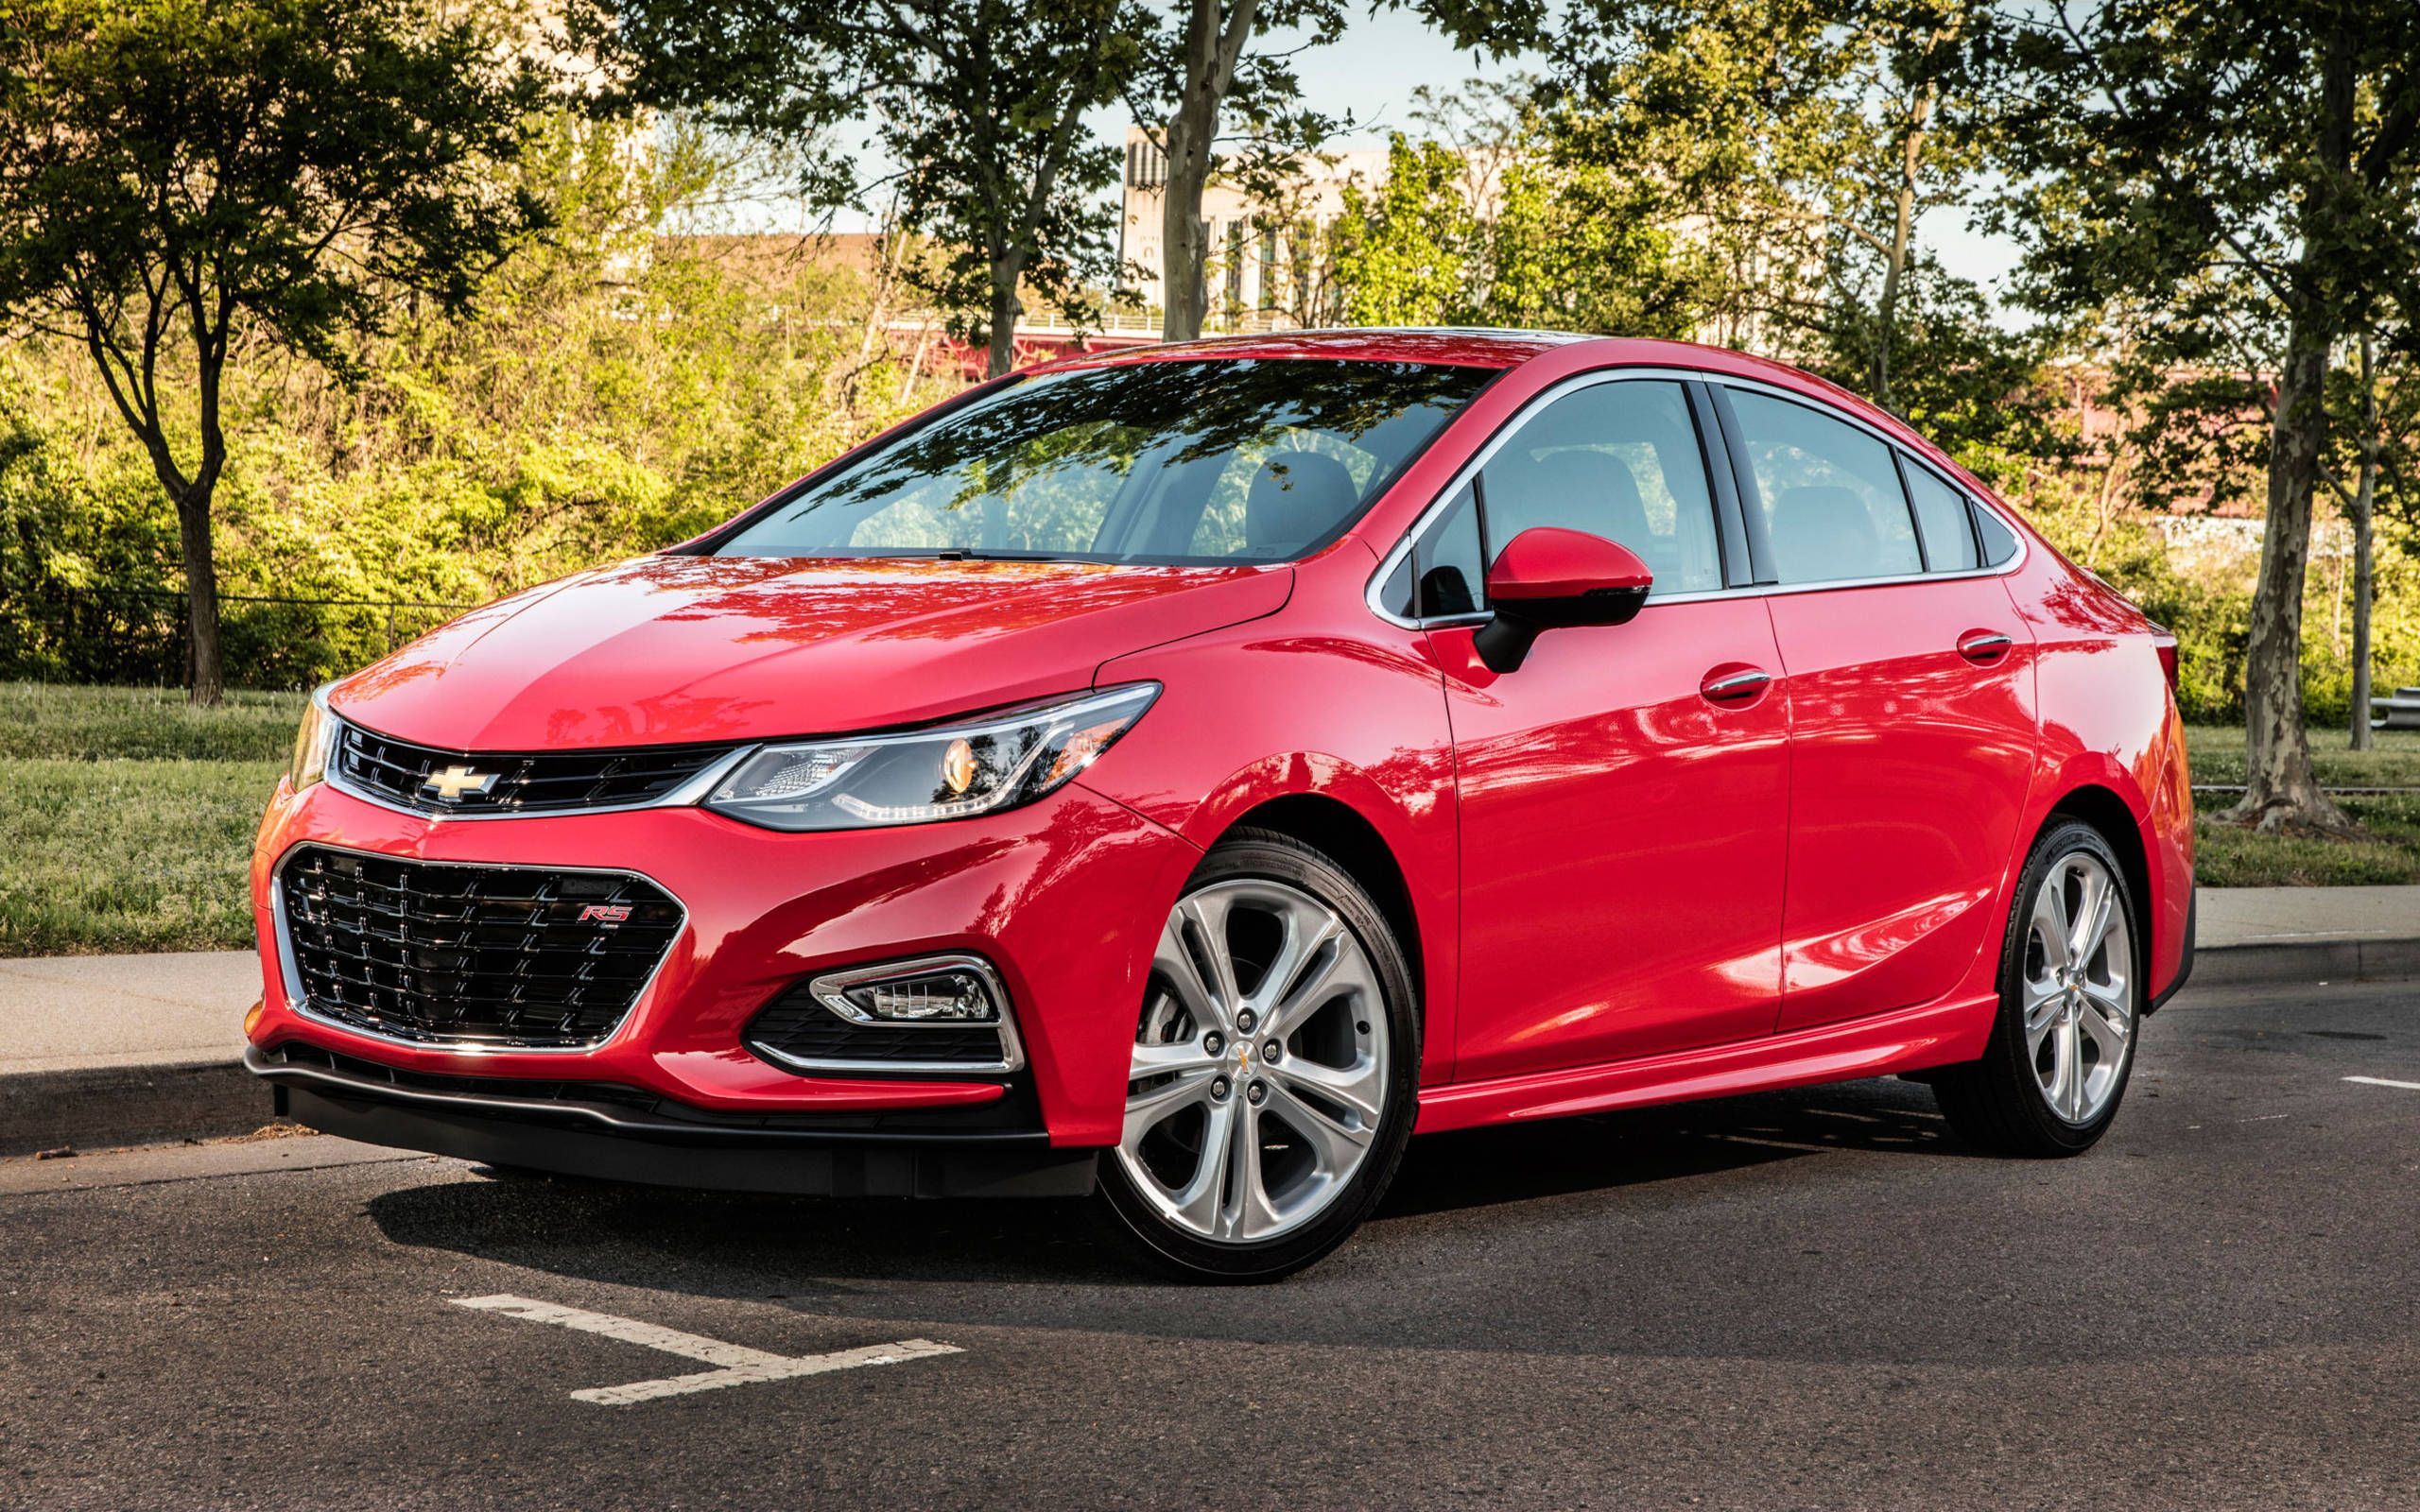 2016 Chevy Cruze Premier review: Rubbing shoulders in a crowded